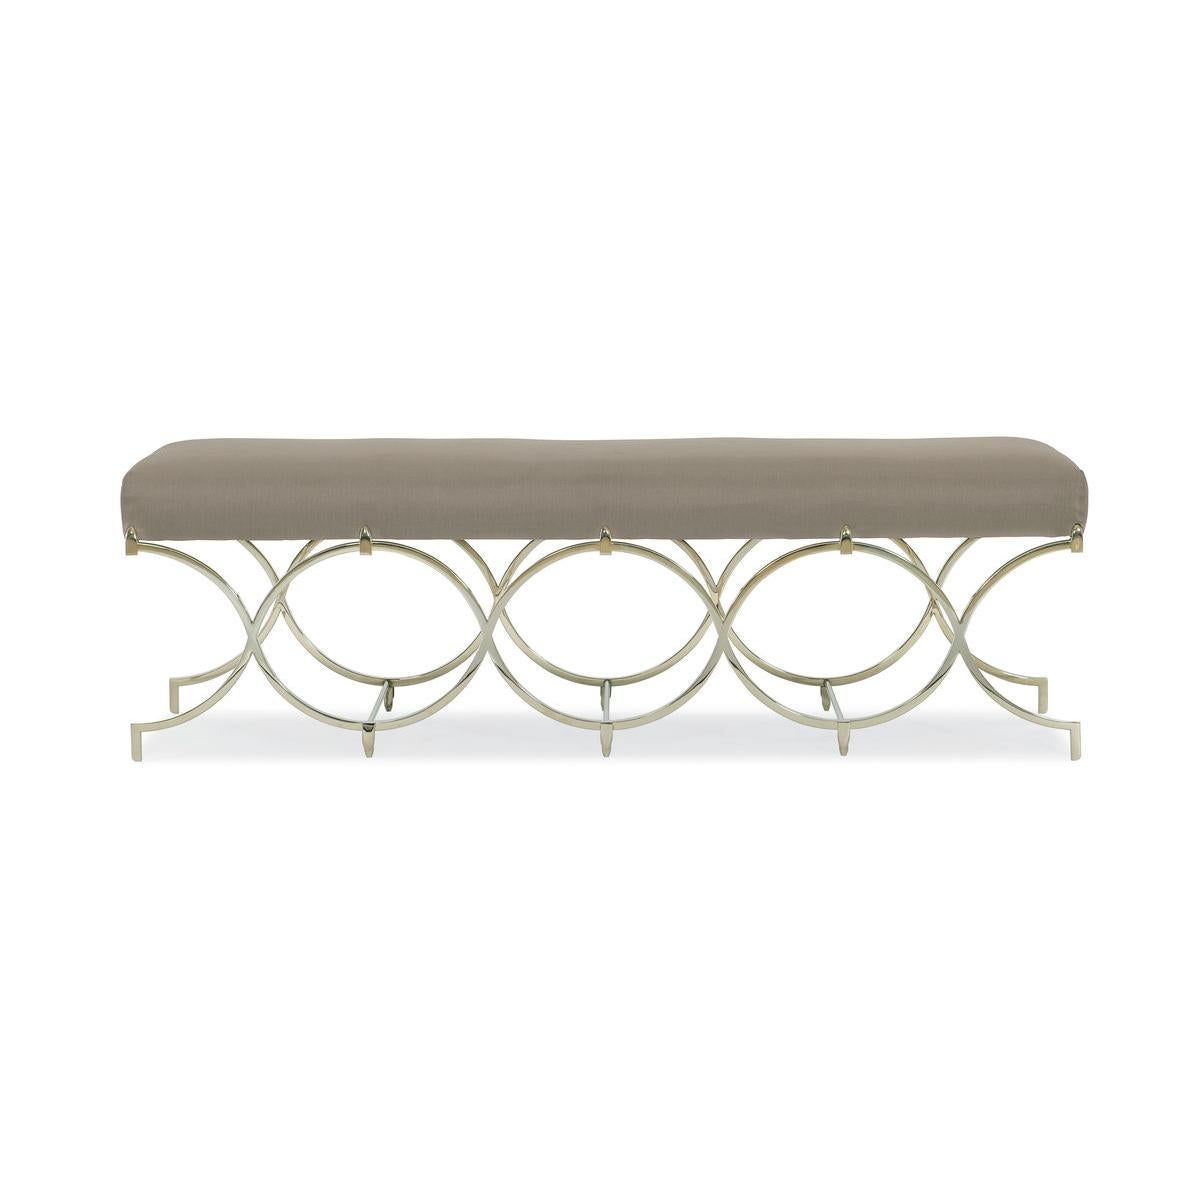 Swirling with Infinite Possibilities are intertwining Whisper of Gold metal rings that create the sculptural base of this exquisite bench. Covered in a dark taupe fabric with the softness and sheen of silk, this piece adds just the right amount of